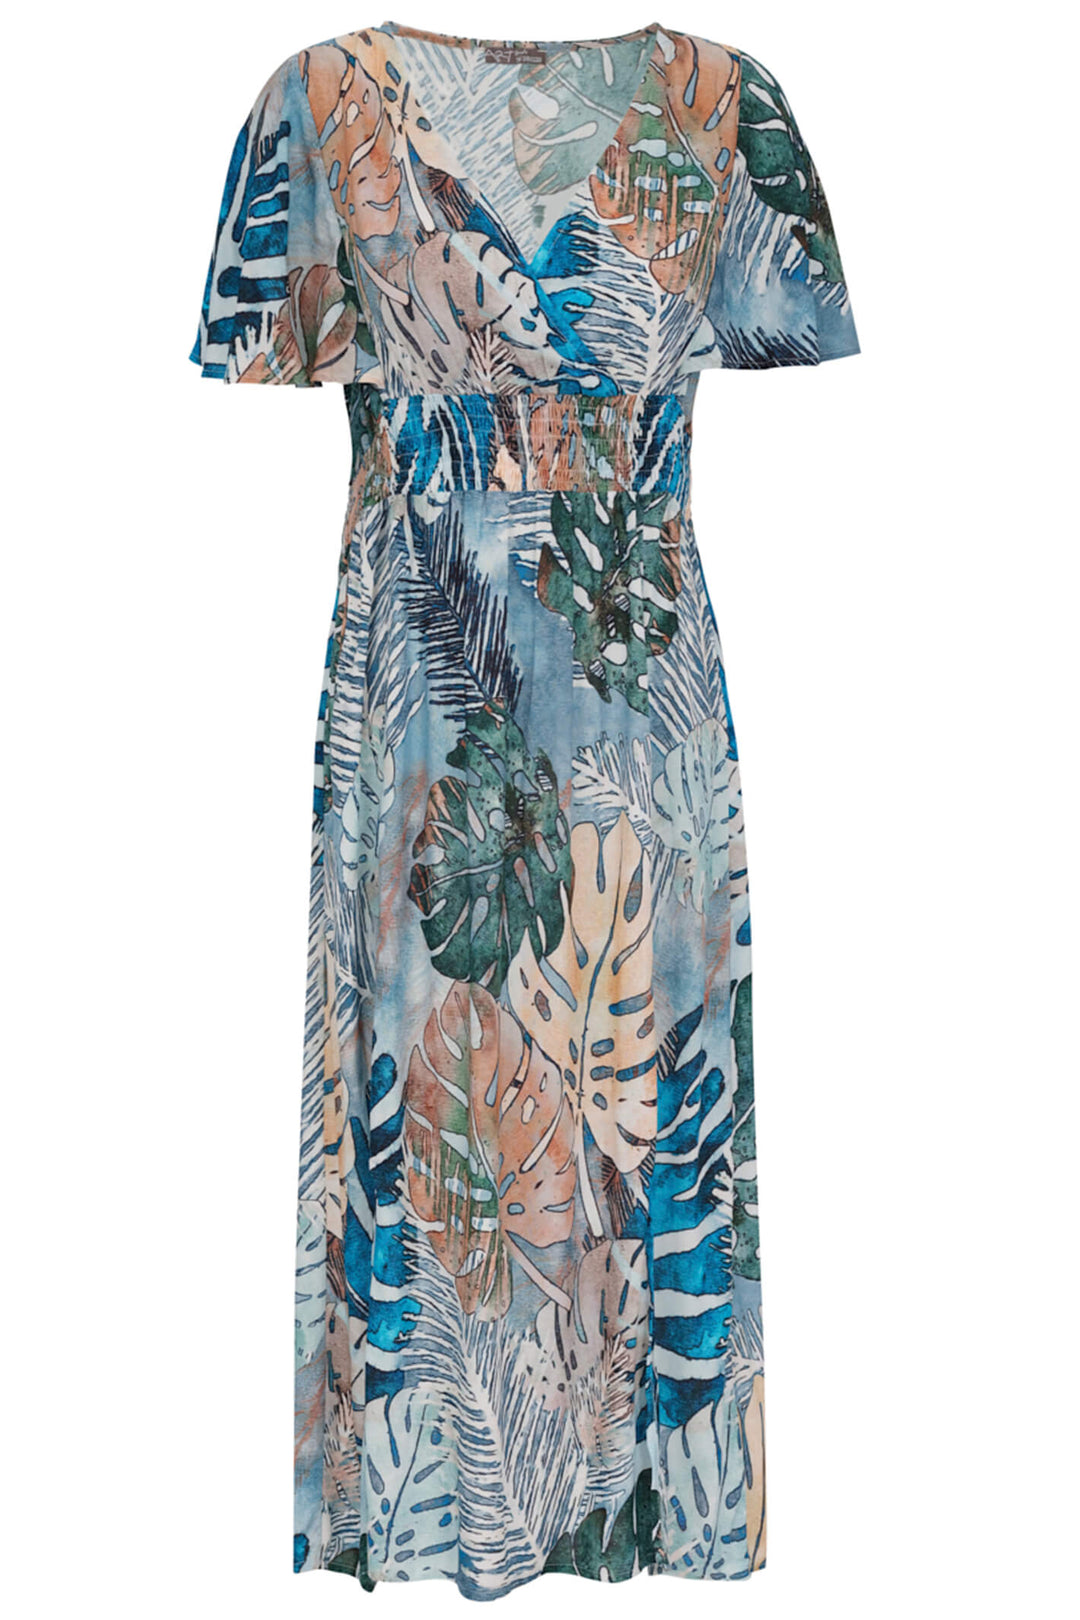 Dolcezza 23657 Tropical Blue Cross Over Midi Dress - Experience Boutique